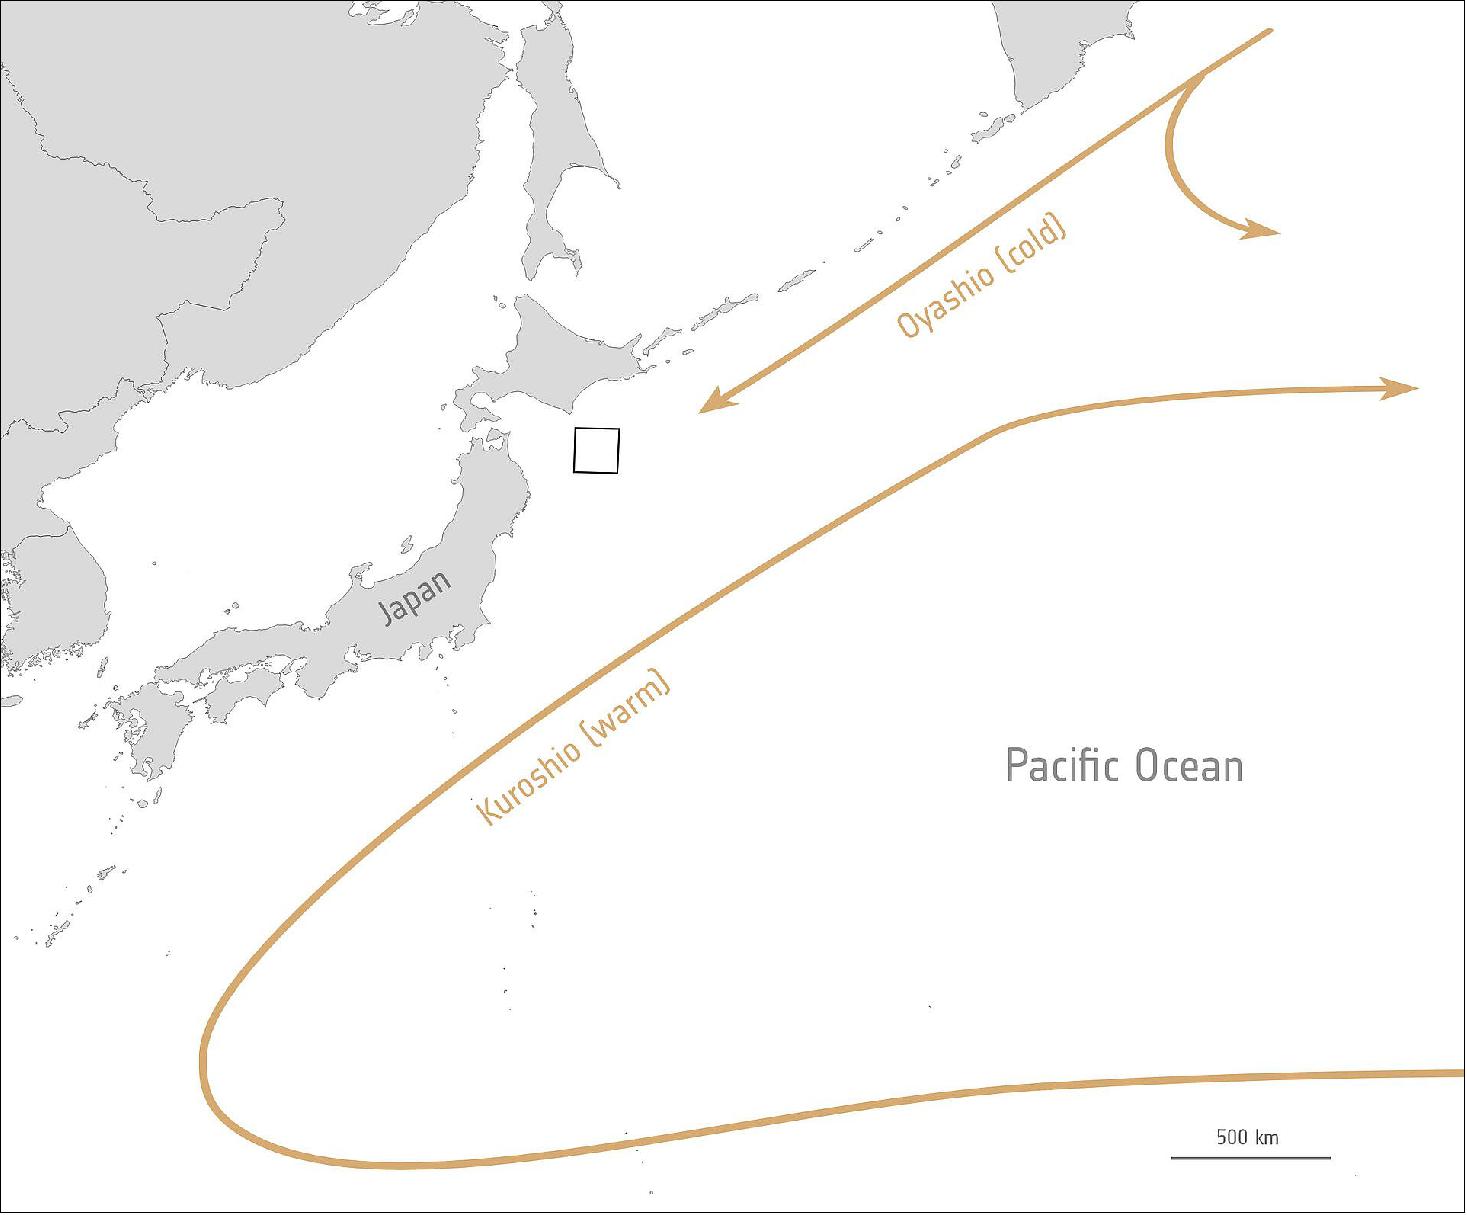 Figure 75: In the Pacific Ocean, near Hokkaido, Japan the colder Oyashio Current converges from the north with the warmer Kuroshio Current, which flows from the south. When two currents with different temperatures and densities collide, they often create eddies – swirls of water drifting along the edge of the two water masses. The phytoplankton growing atop the surface waters become concentrated along the boundaries of these eddies and trace out the motions of the water (image credit: ESA)